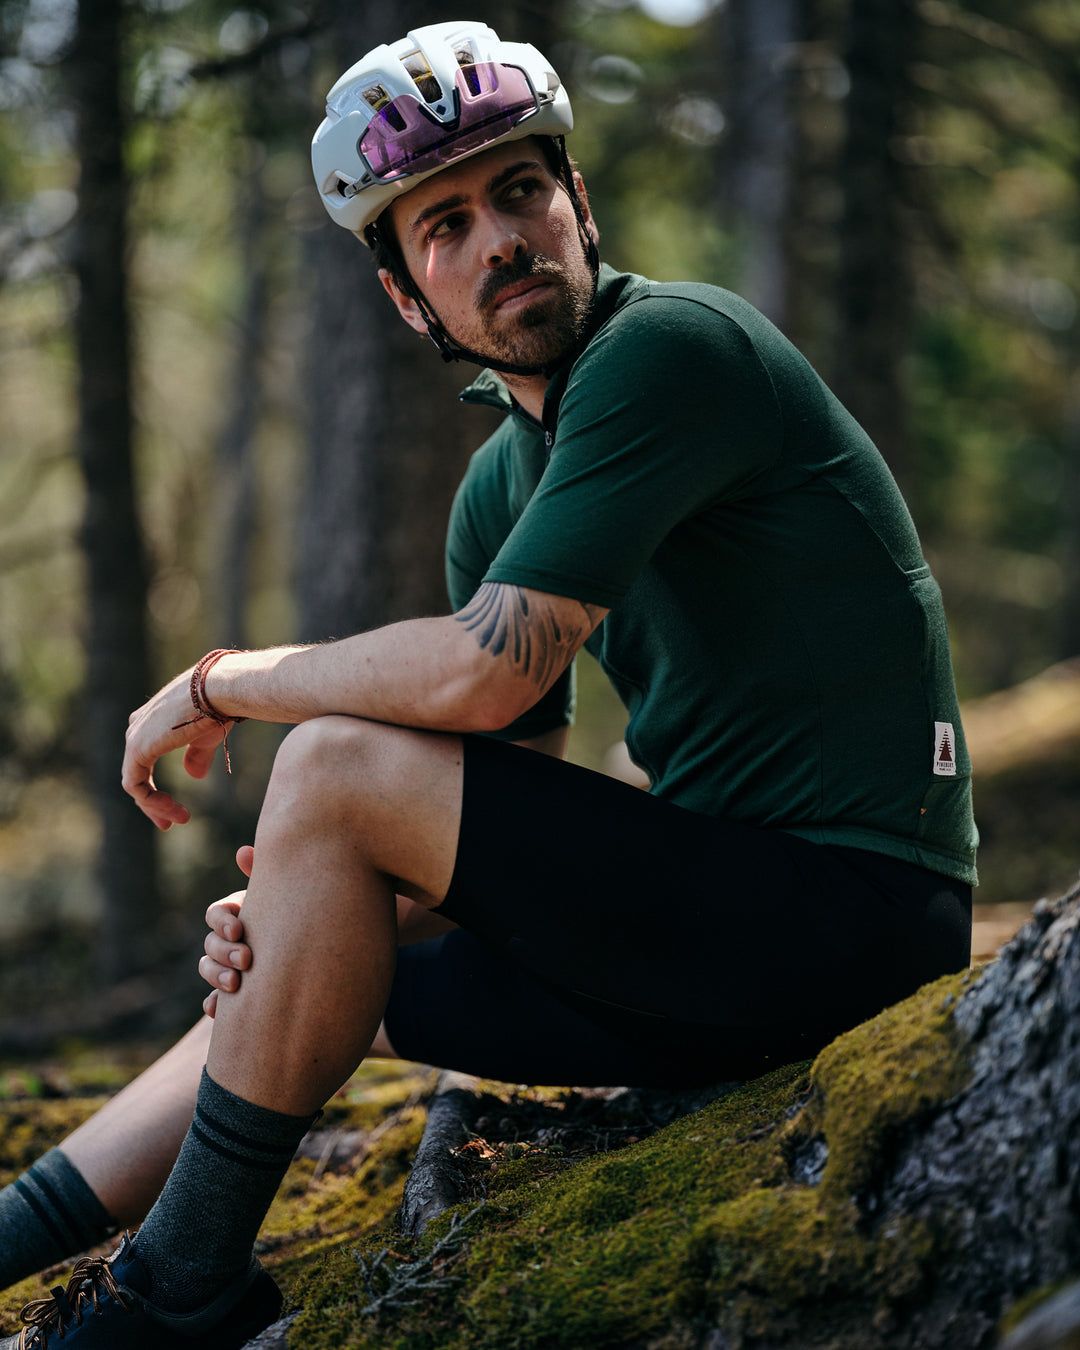 Pinebury Rangeley Long Sleeve Merino Wool Cycling Jersey in Pine. Male cyclist sitting on a mossy rock looking behind himself with his arm on his knee. He is wearing a green cycling jersey with black bibs and a white helmet.